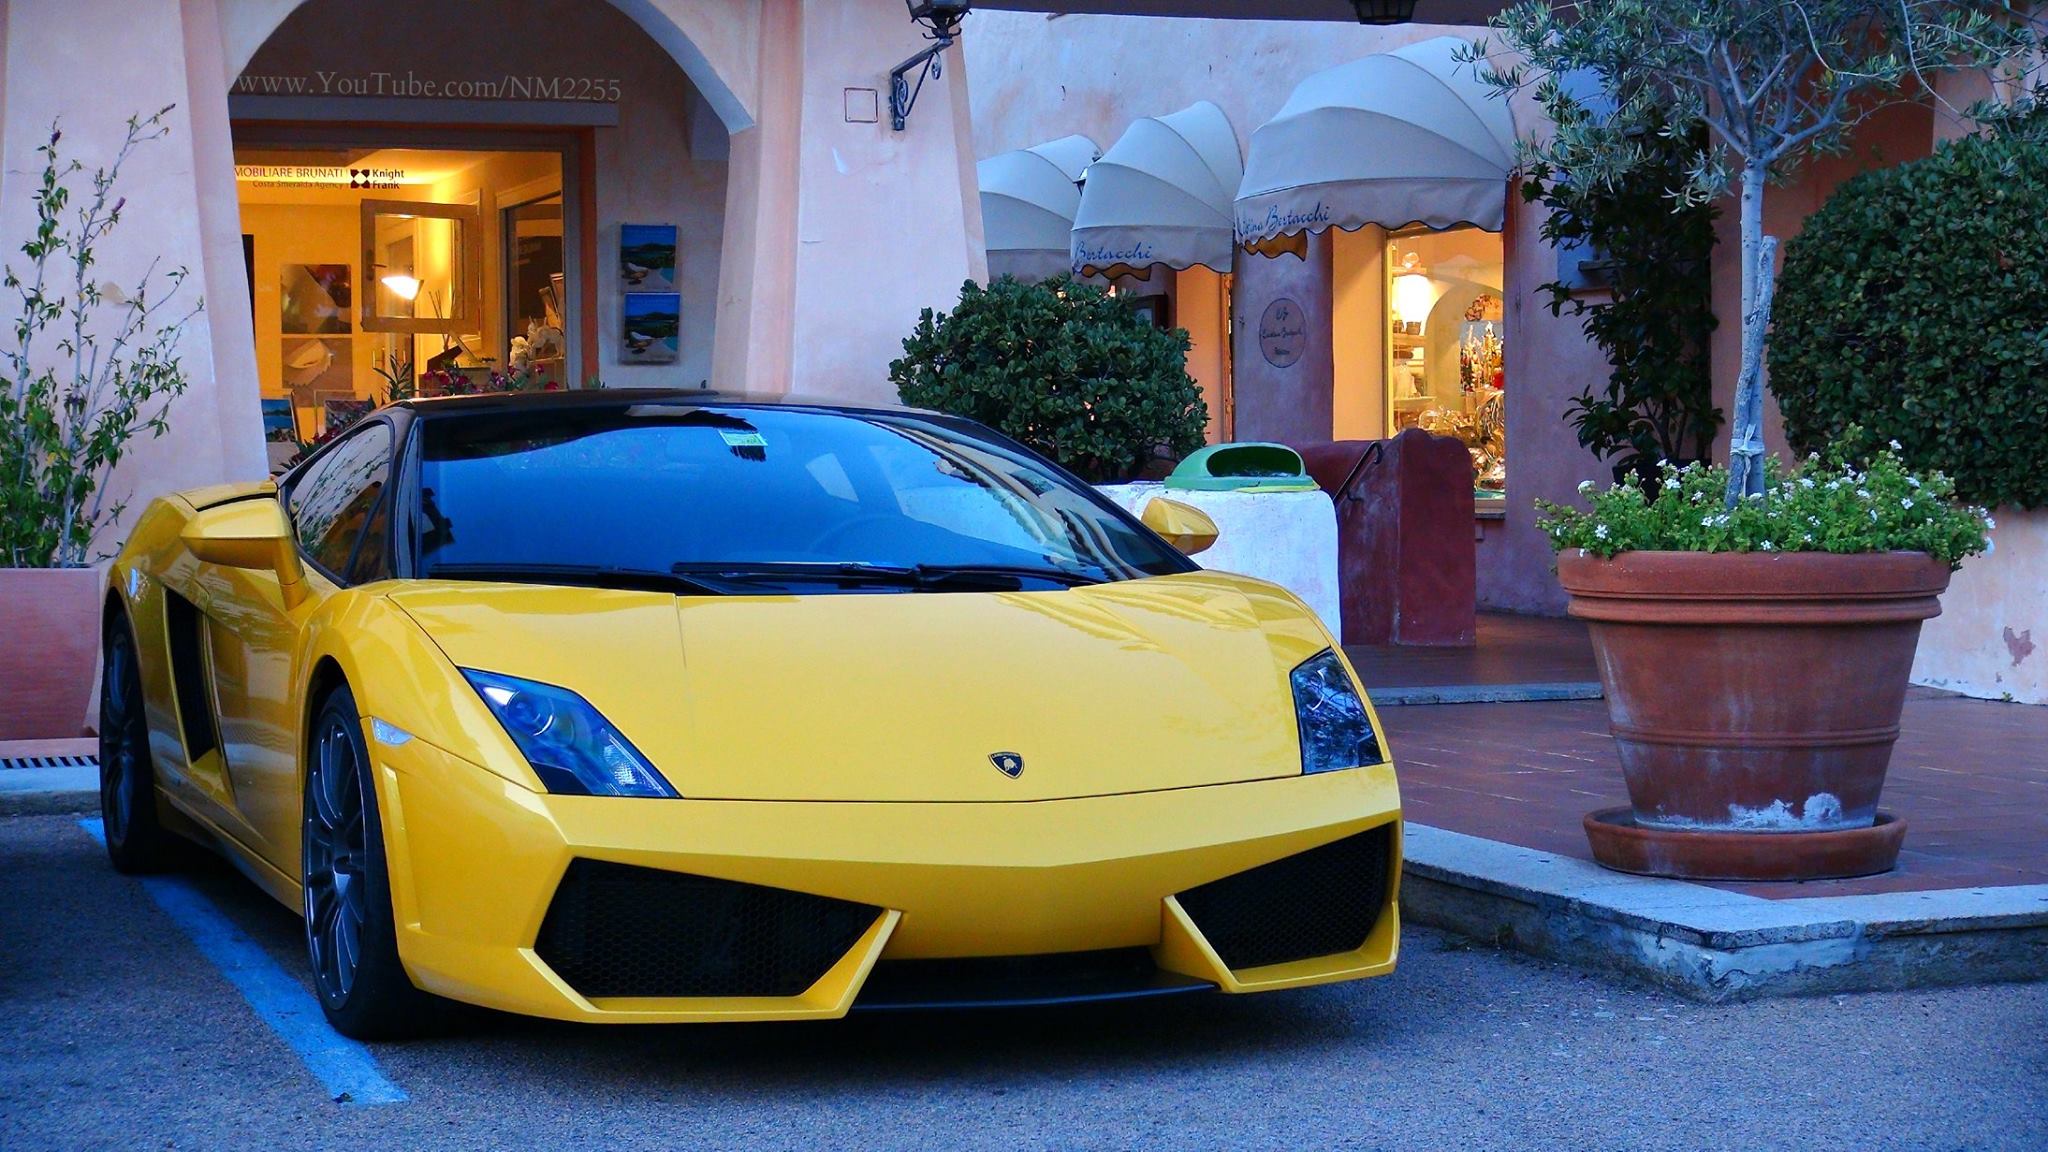 How many "Thumbs Up" can this stunning Gallardo Bicolore get?